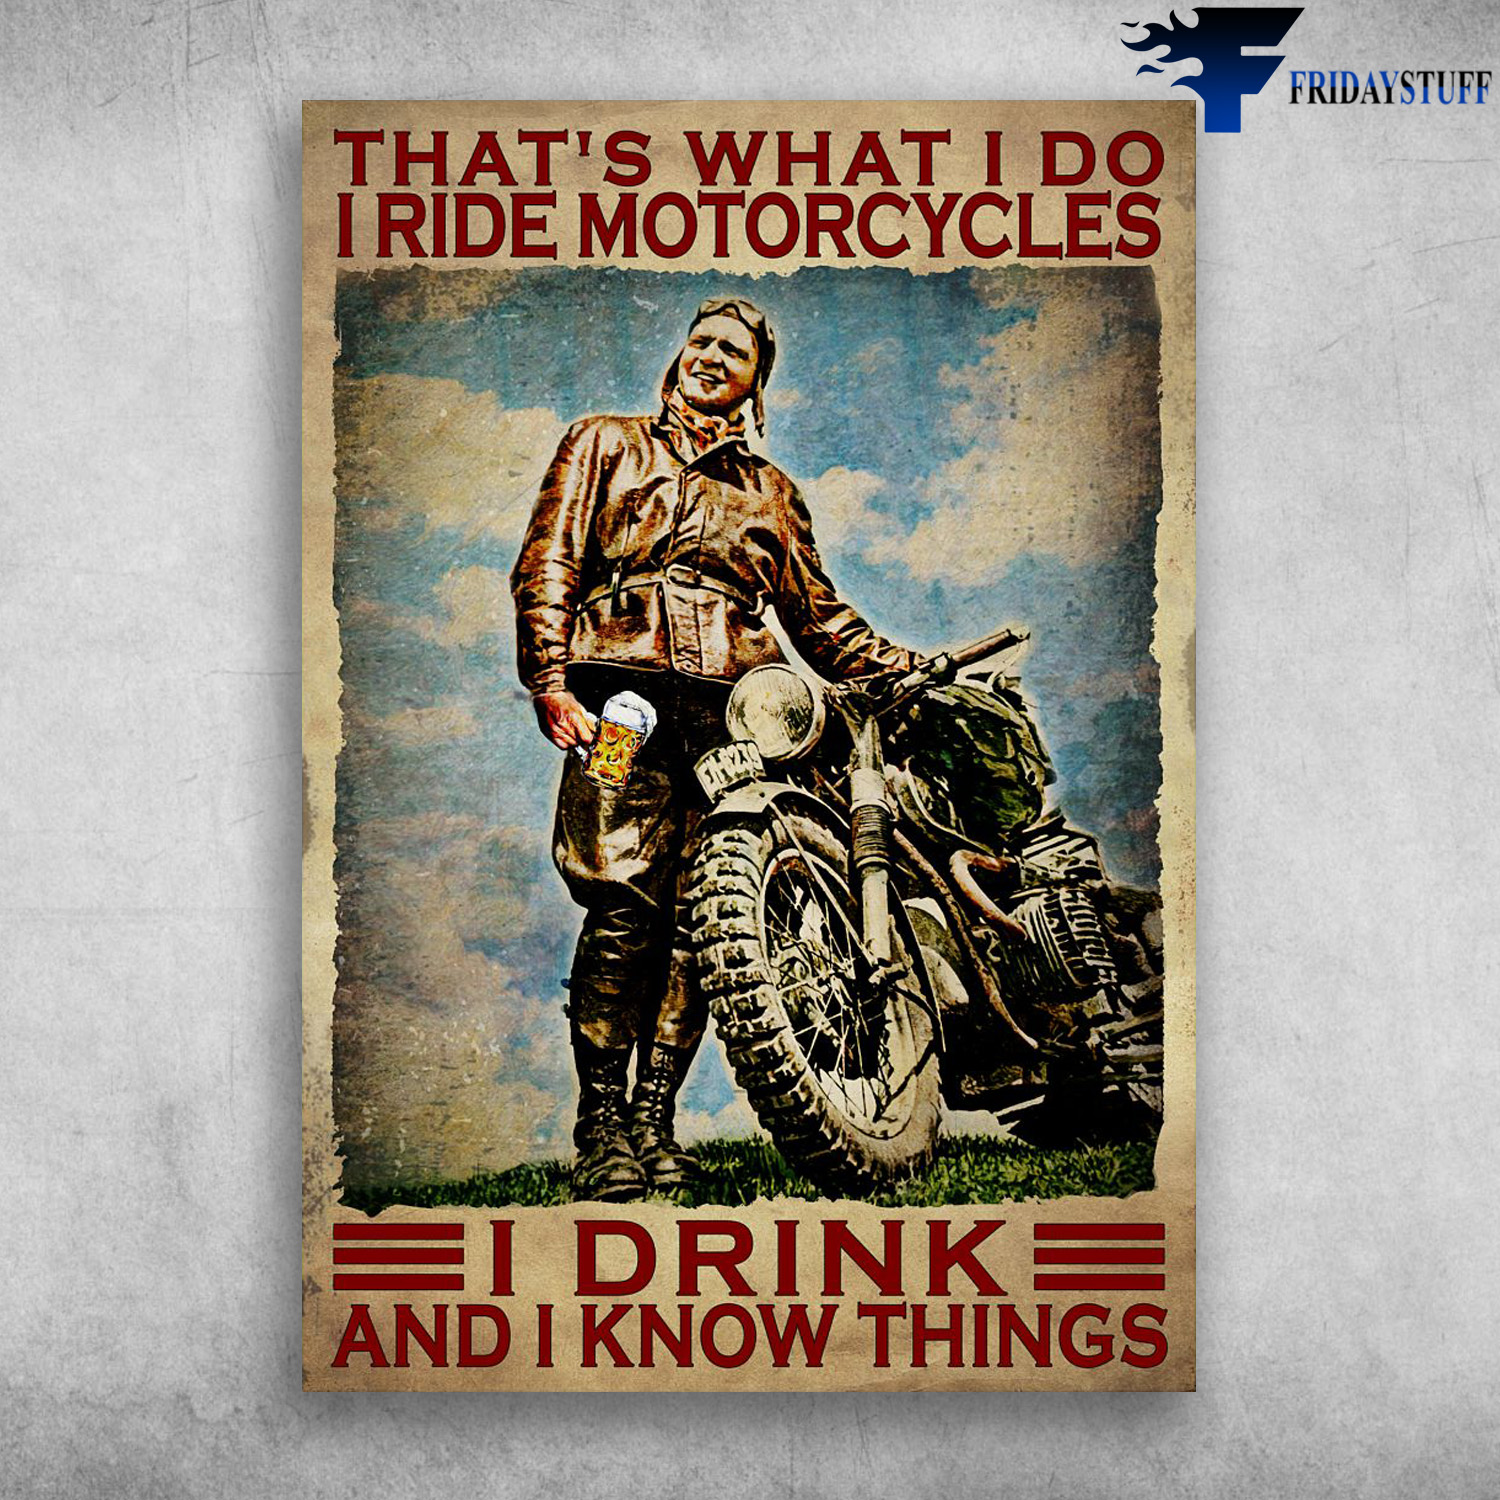 Motorcycle Man, Drink Beer - That's What I Do, I Ride Motorcycles, I Drink, And I Know Things